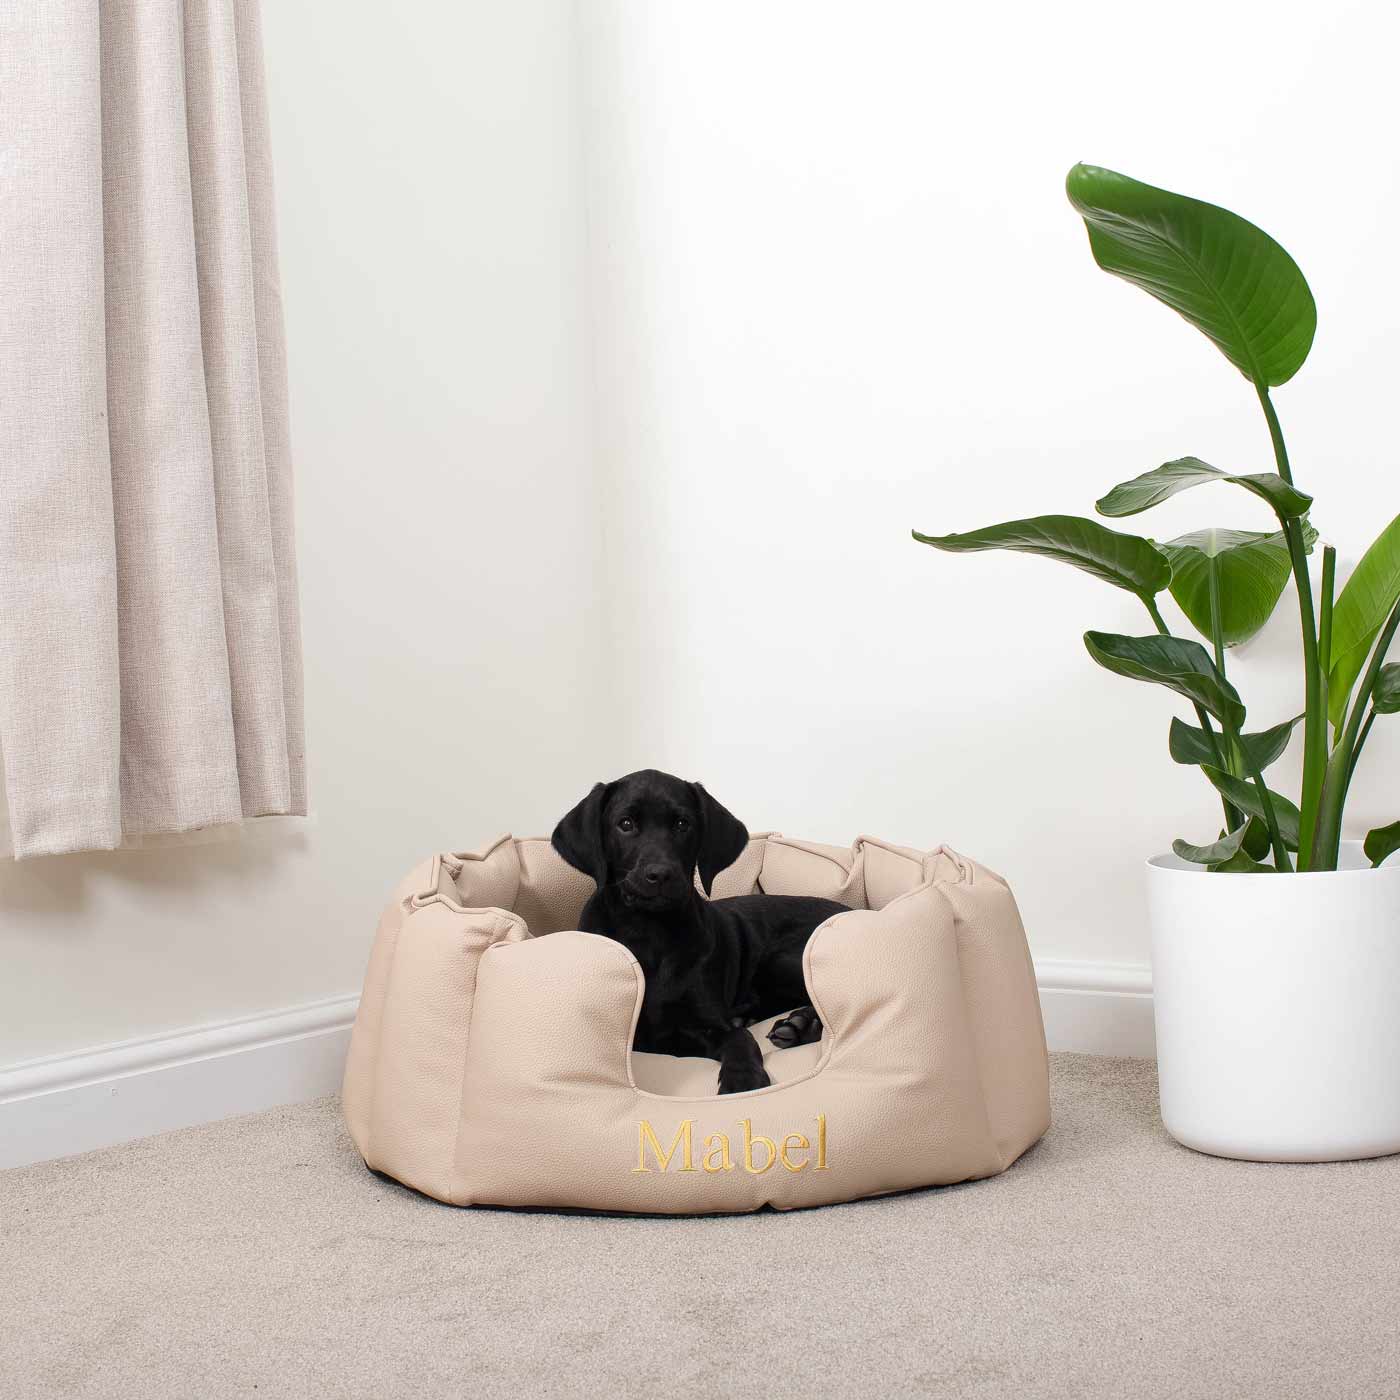 Luxury Handmade High Wall in Rhino Tough Faux Leather, in Sand, Perfect For Your Pets Nap Time! Available To Personalise at Lords & Labradors